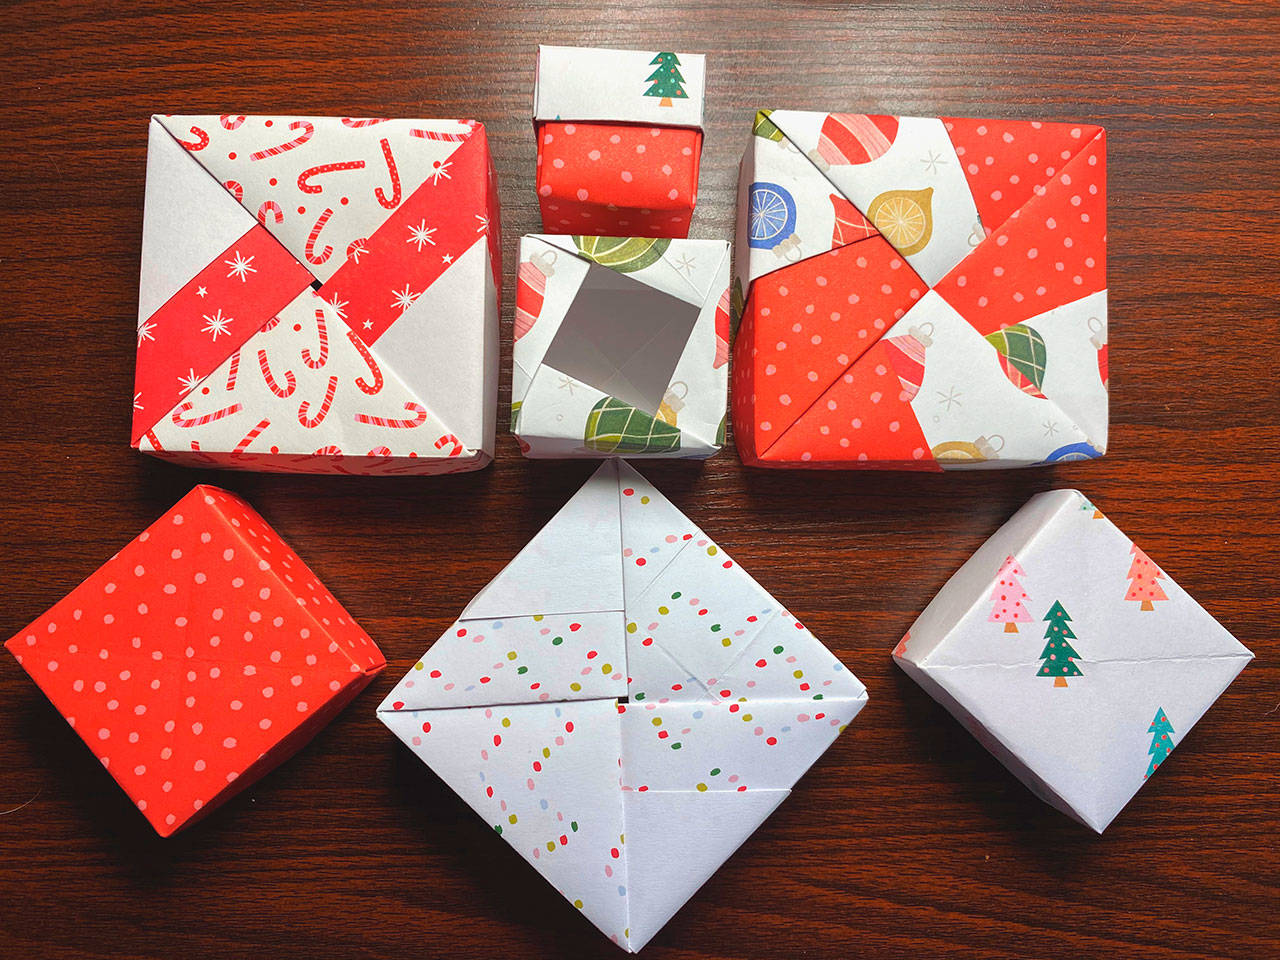 A Zoom workshop will instruct participants in how to origami boxes using kits as part of the North Olympic Library System’s CreativiTea series. (Photo courtesy of North Olympic Library System)